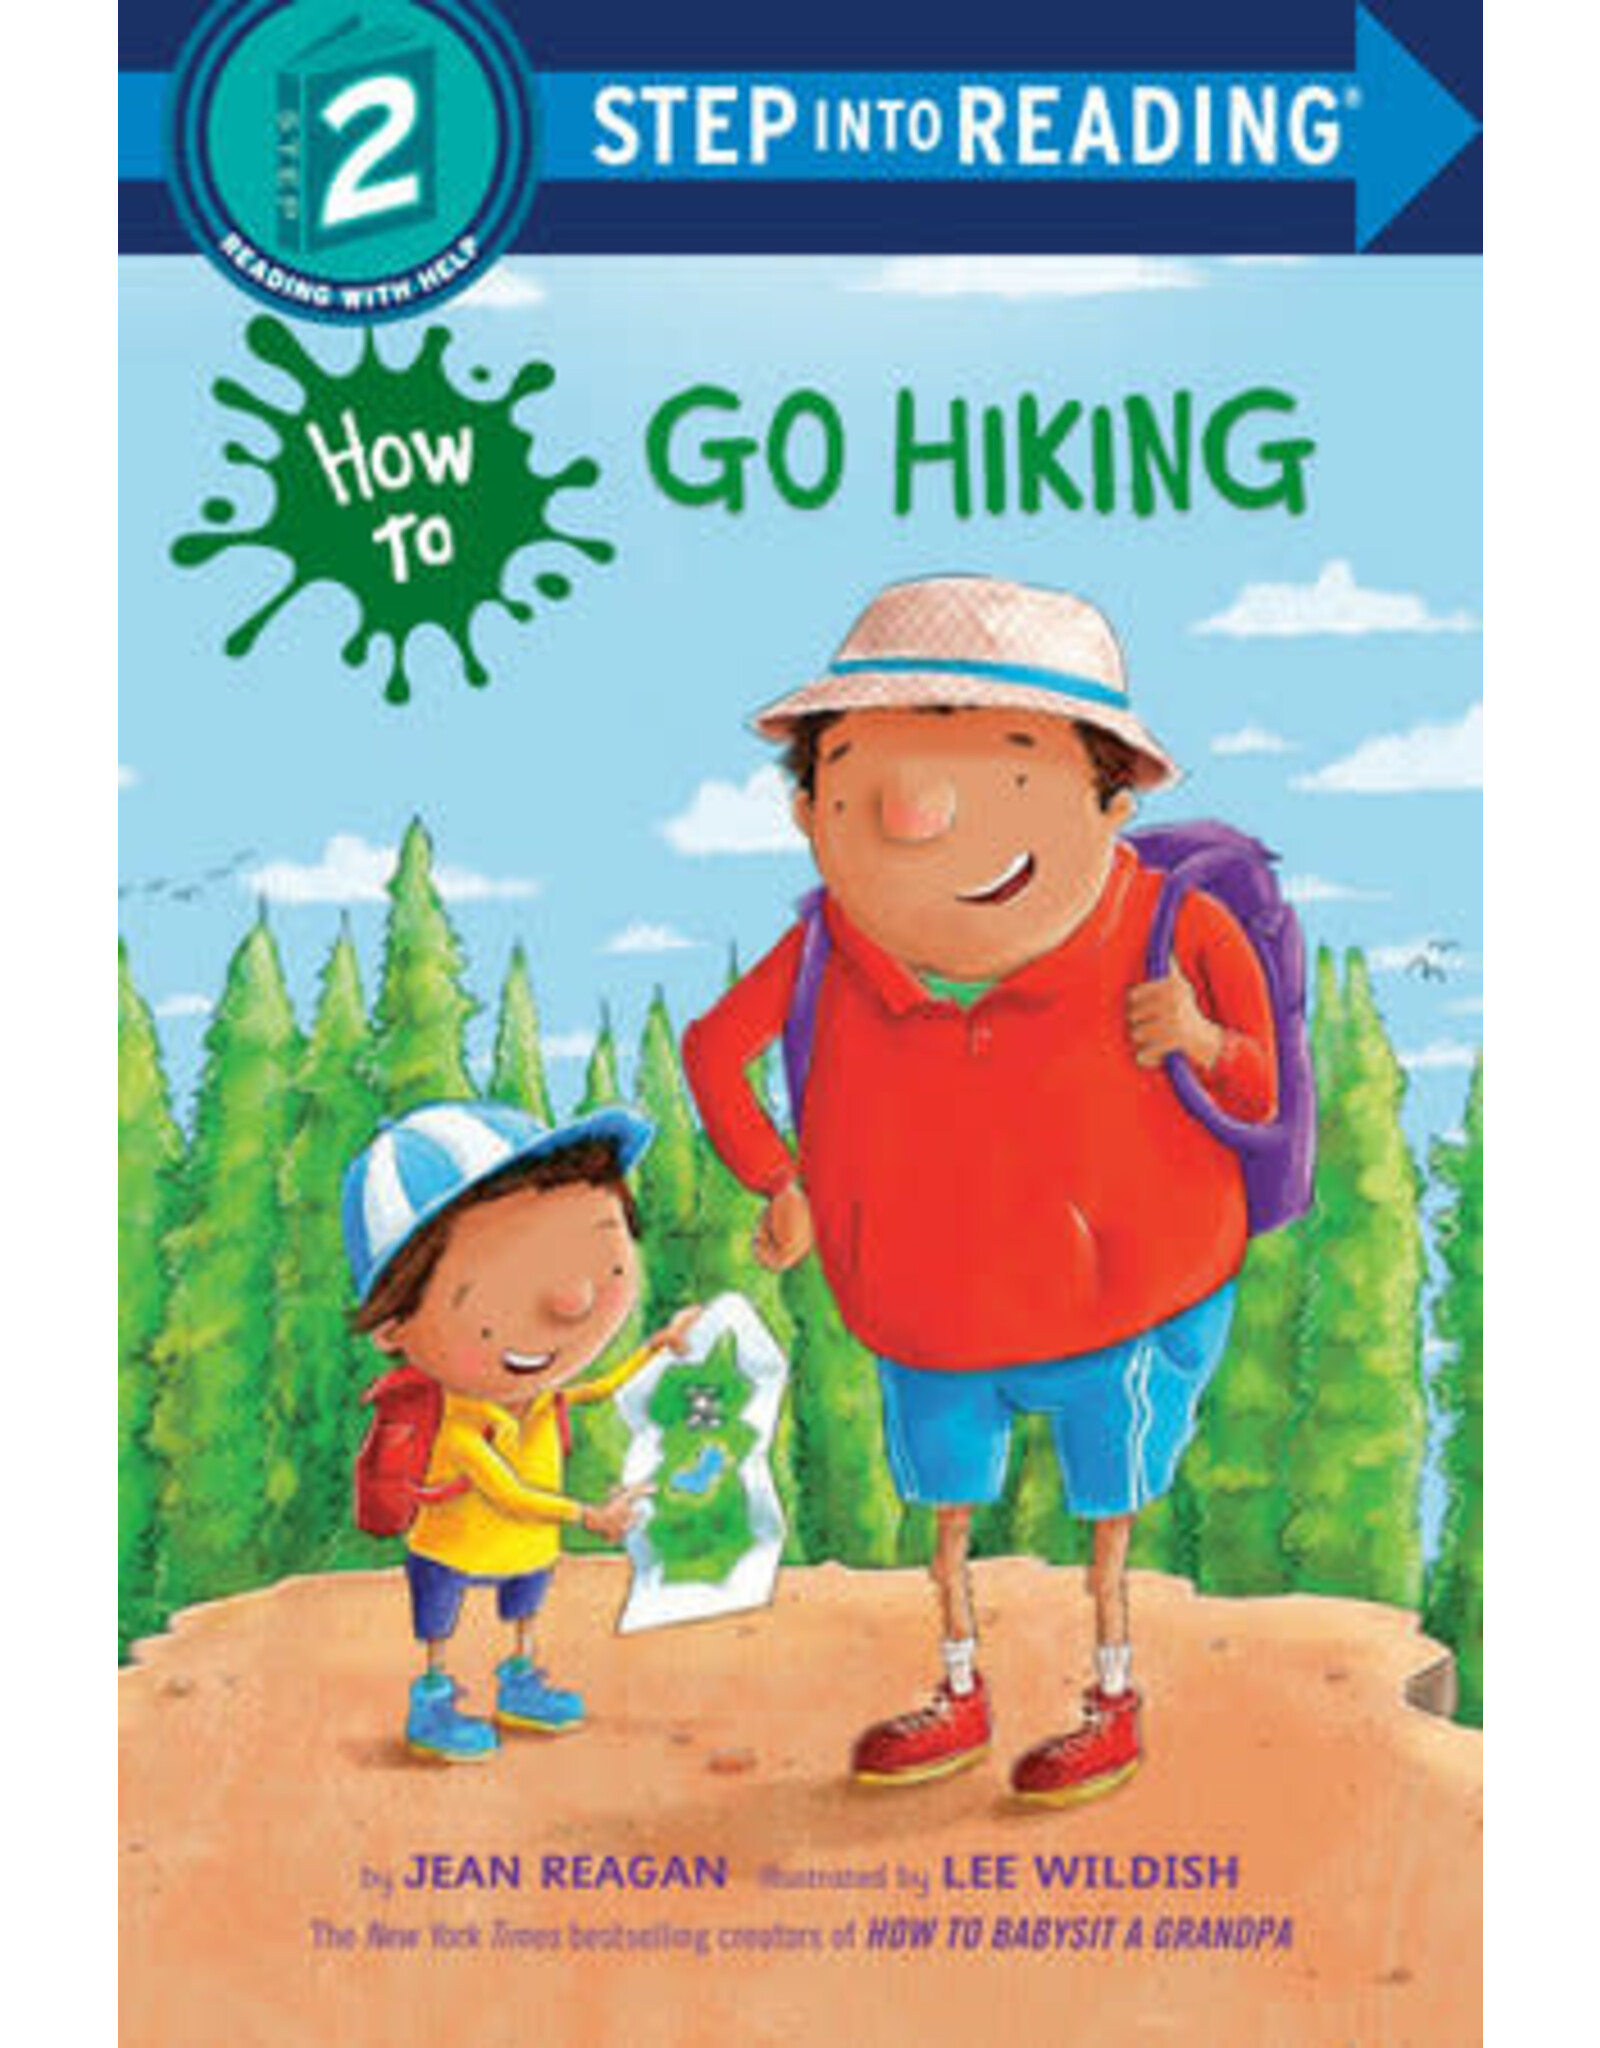 Step Into Reading Step Into Reading - How to Go Hiking (Step 2)